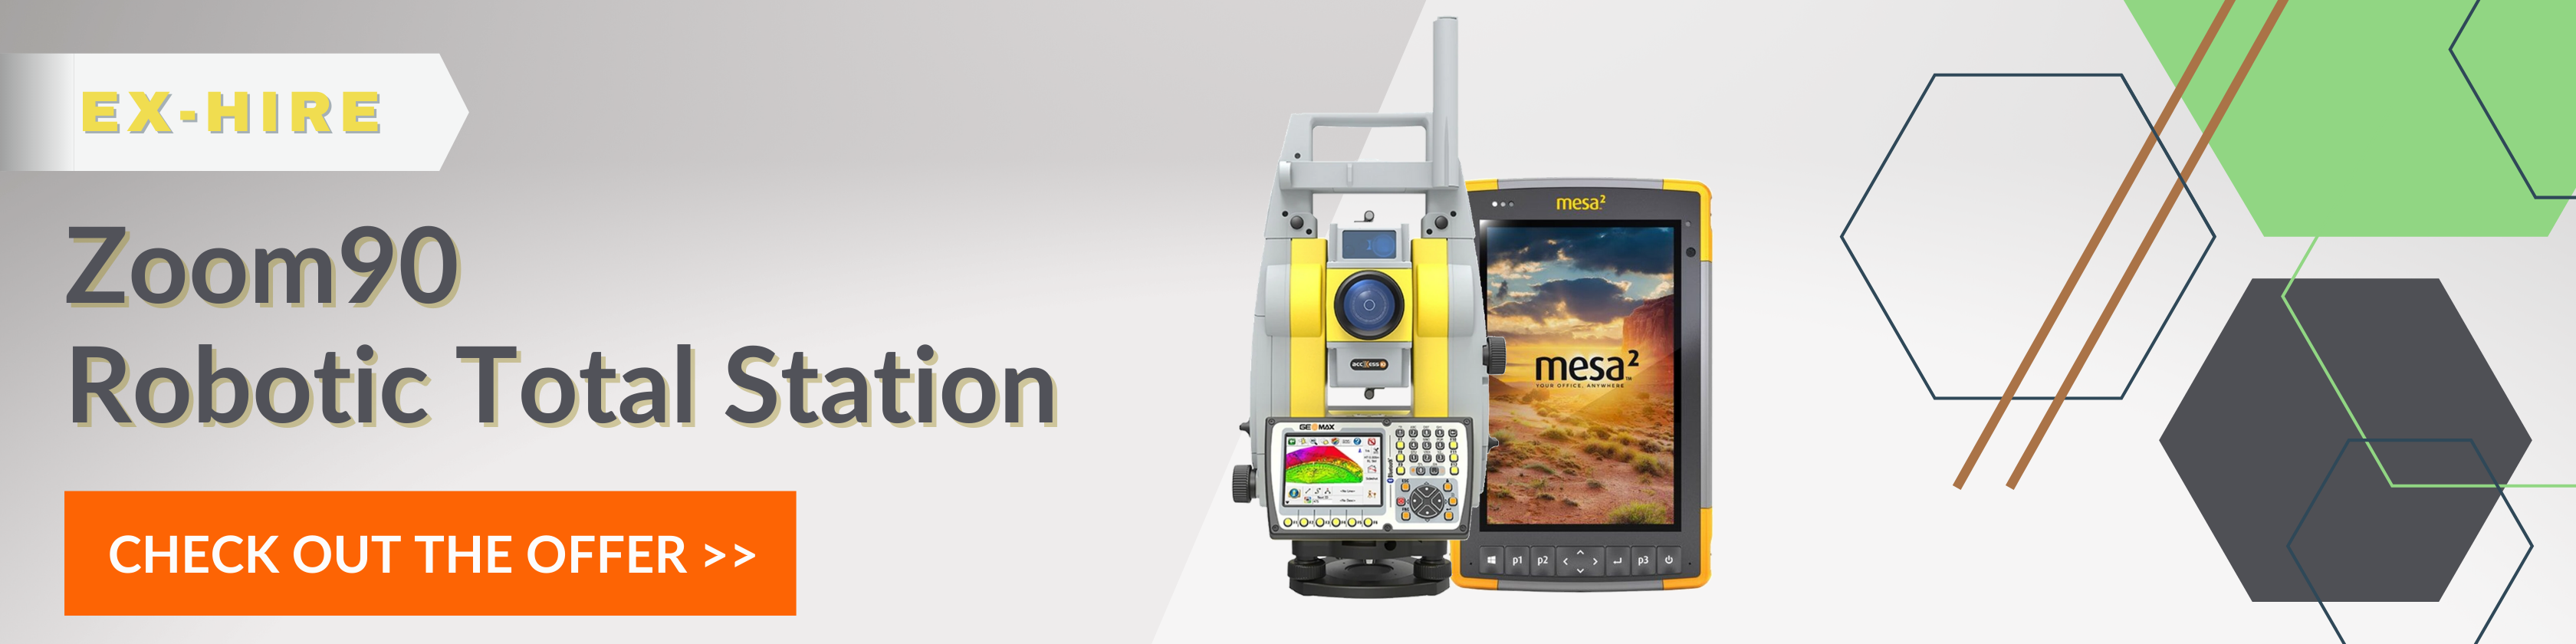 used Zoom90 robotic total station offer